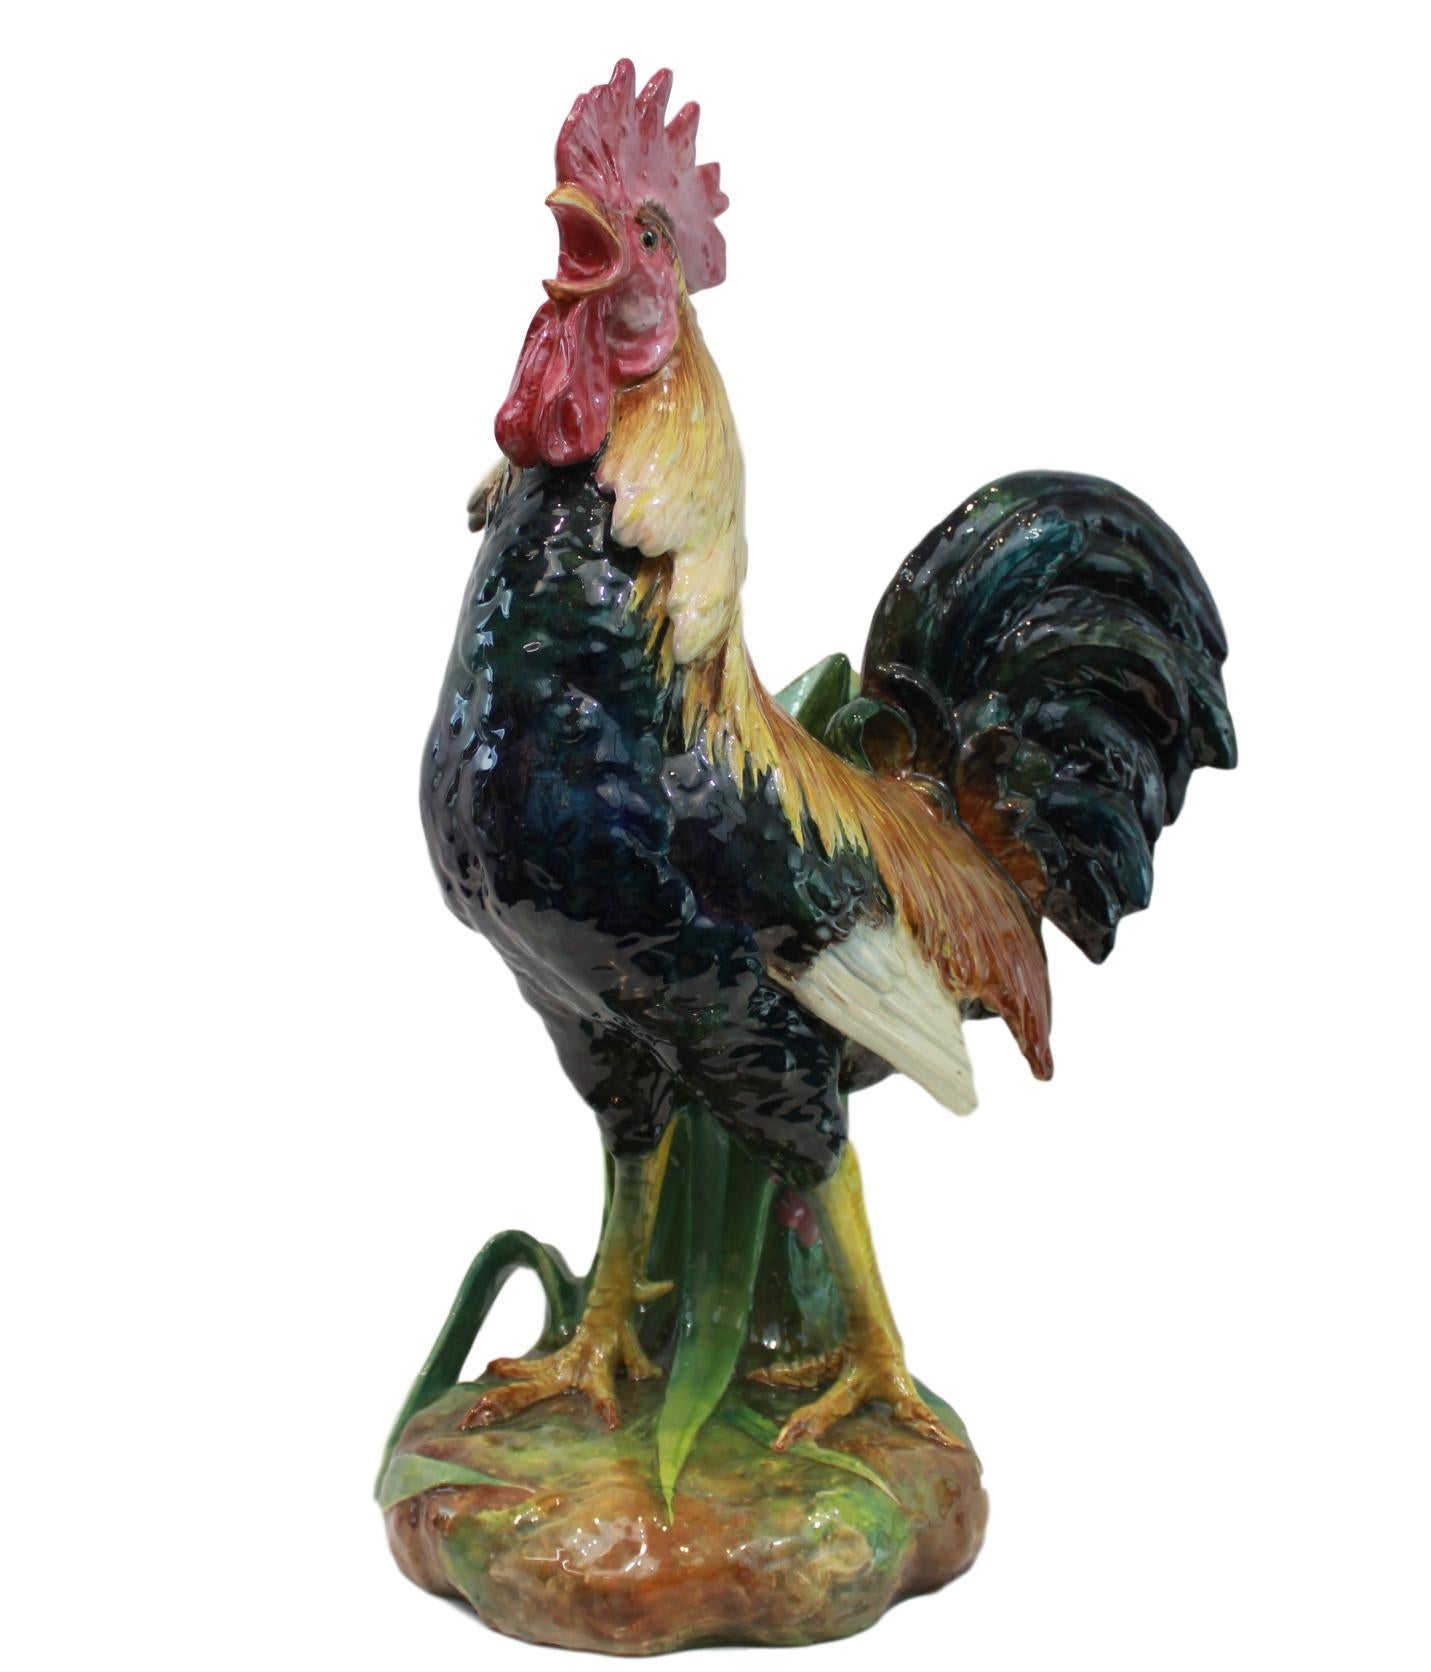 Victorian Very Large Majolica Rooster Vase by Jerome Massier, French, circa 1880